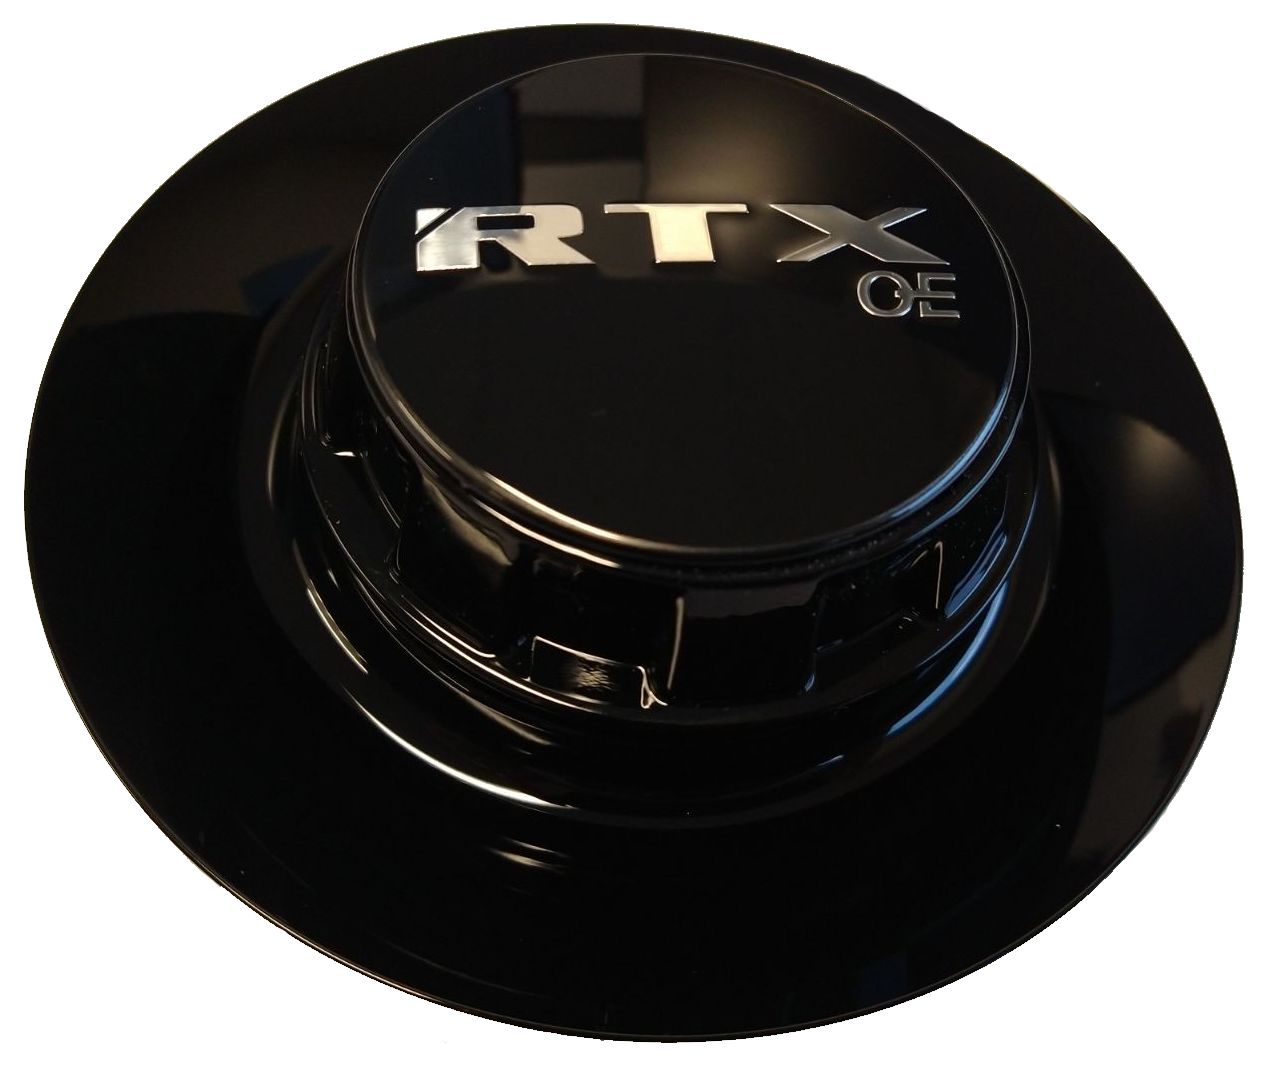 Cap Black with RTXoe Chrome with Black Background BC383